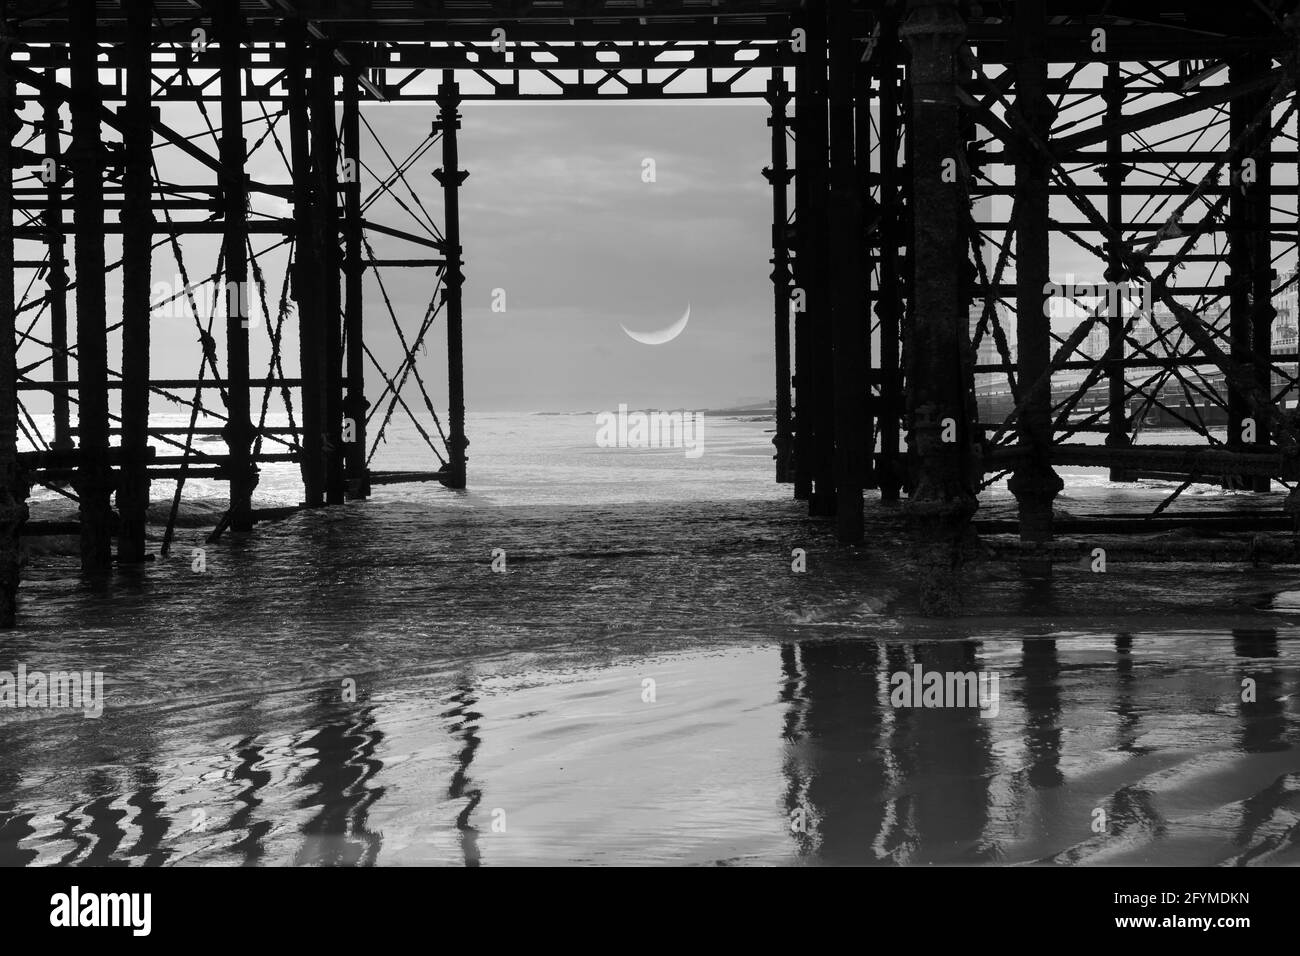 Crescent moon viewed through a pier with reflections in the wet sand Stock Photo